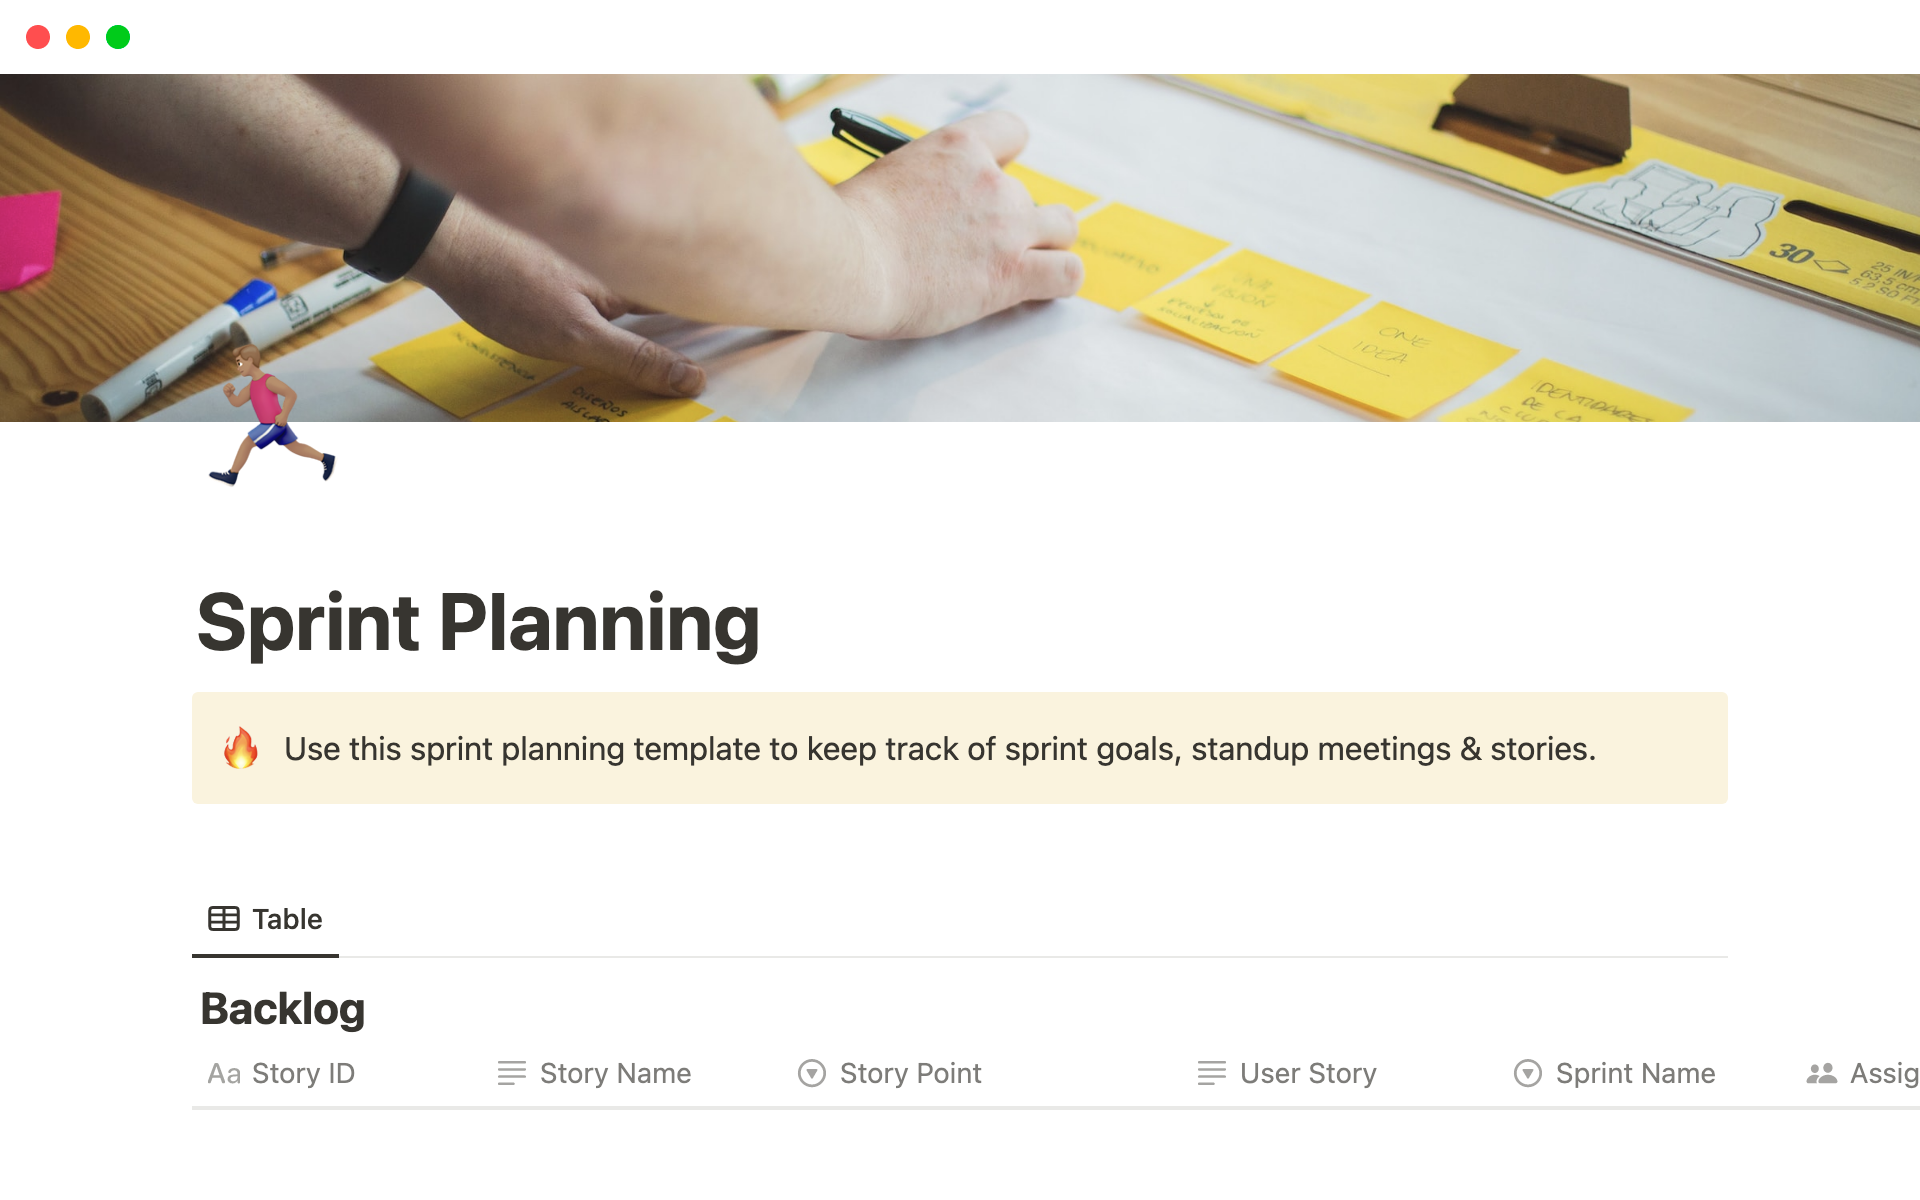 Use this Sprint Planning Template so you can easily improve your project management system and monitor important stages of product development.